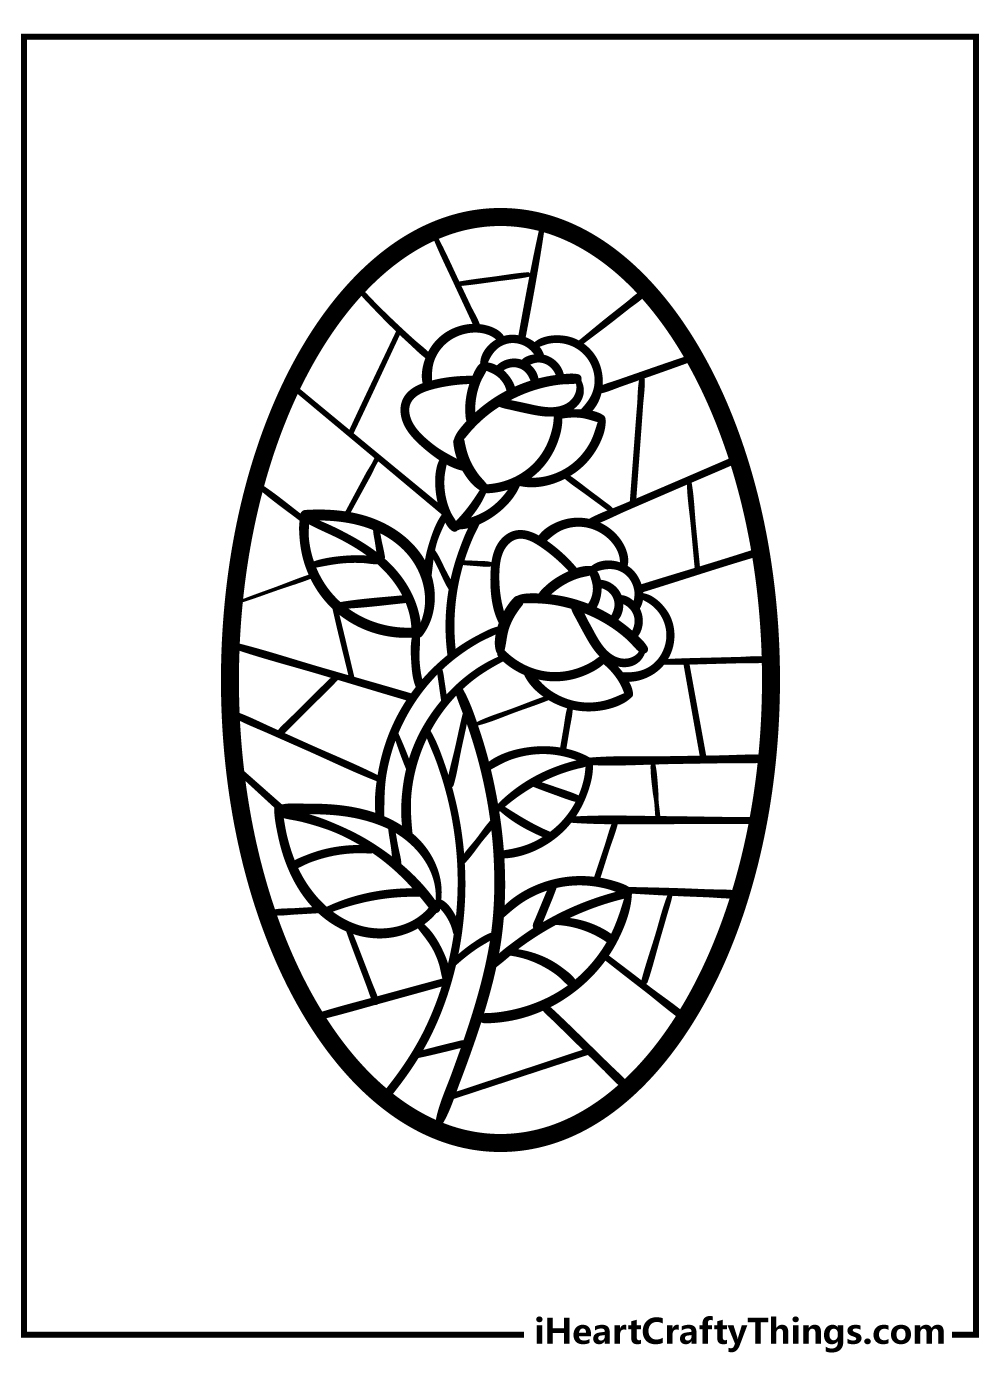 Stained Glass Coloring Original Sheet for children free download